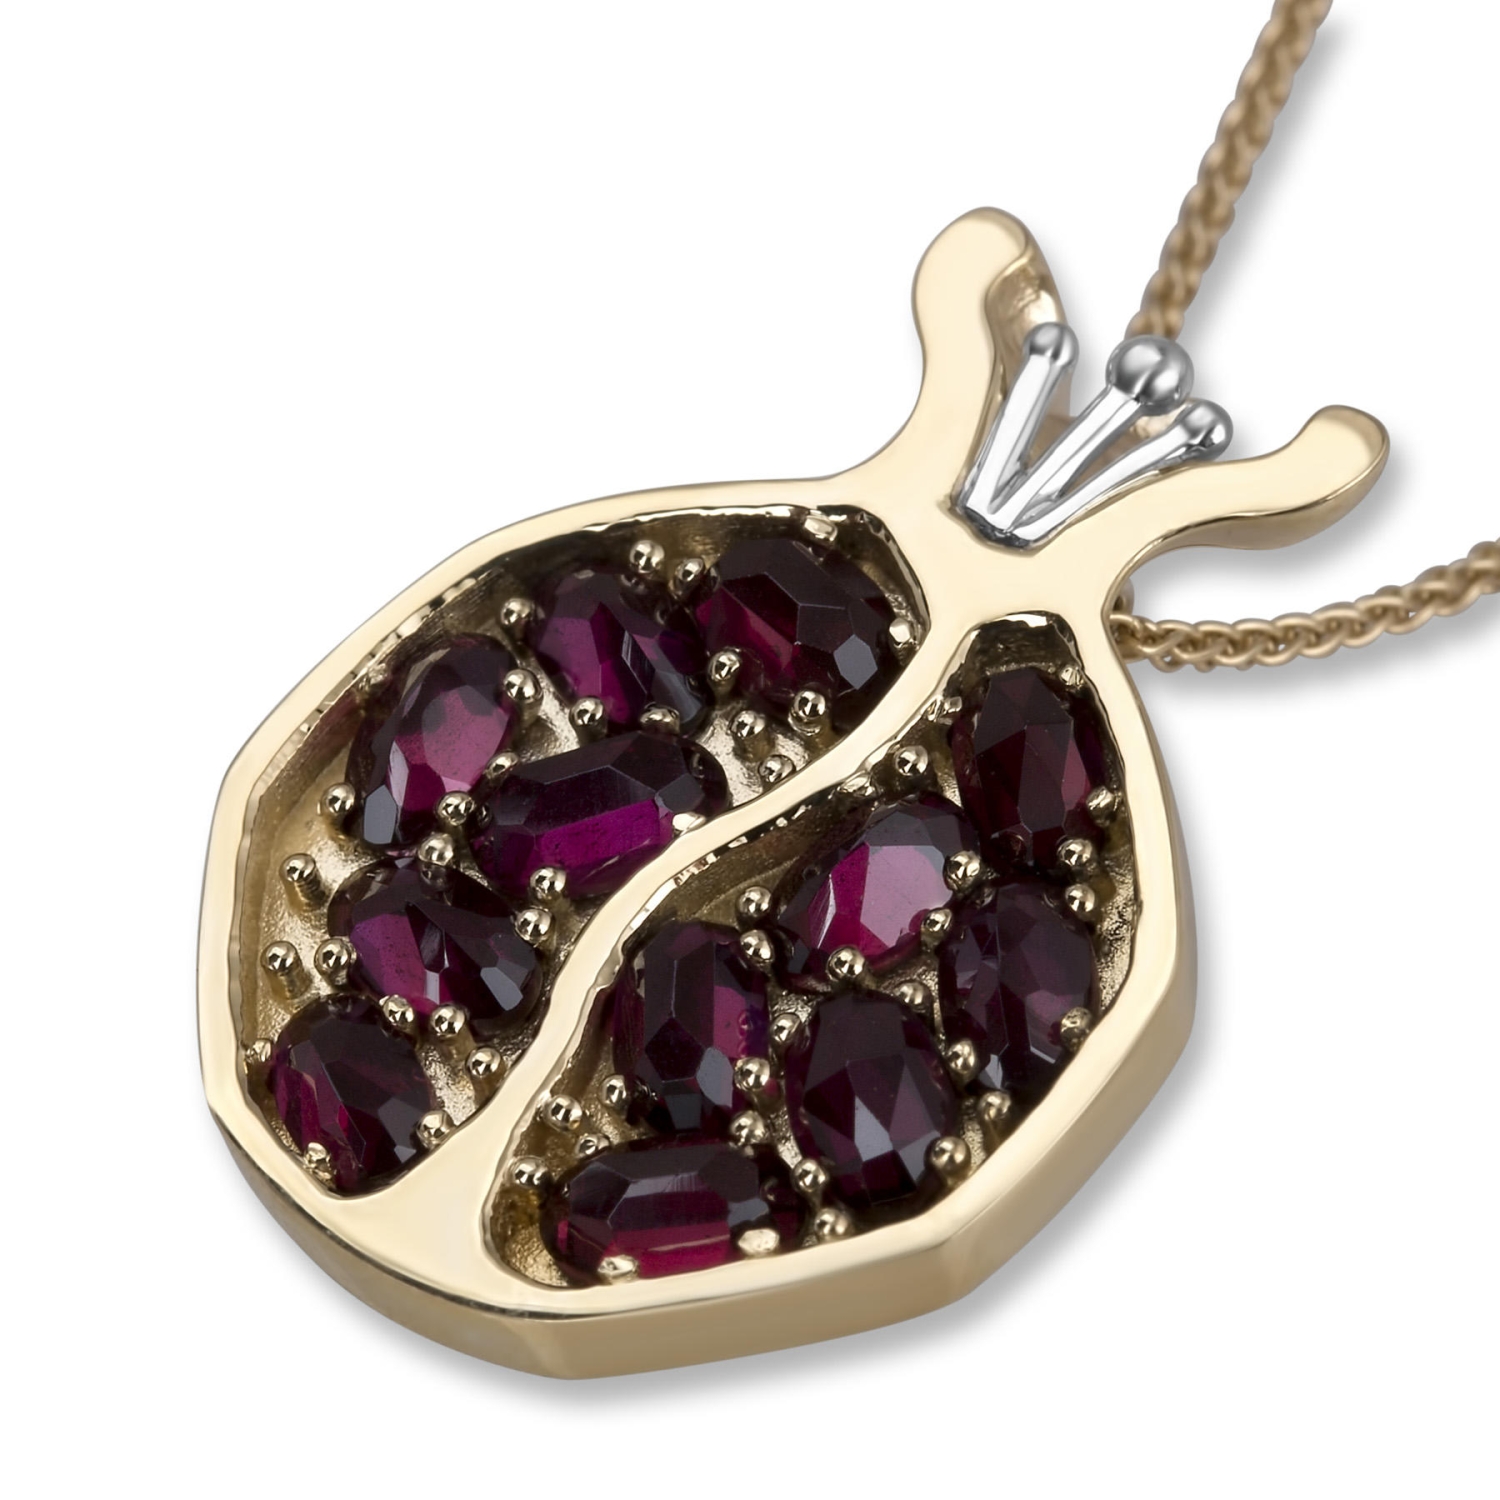 14K Gold Pomegranate Pendant with Garnets and White Gold Detail - 1